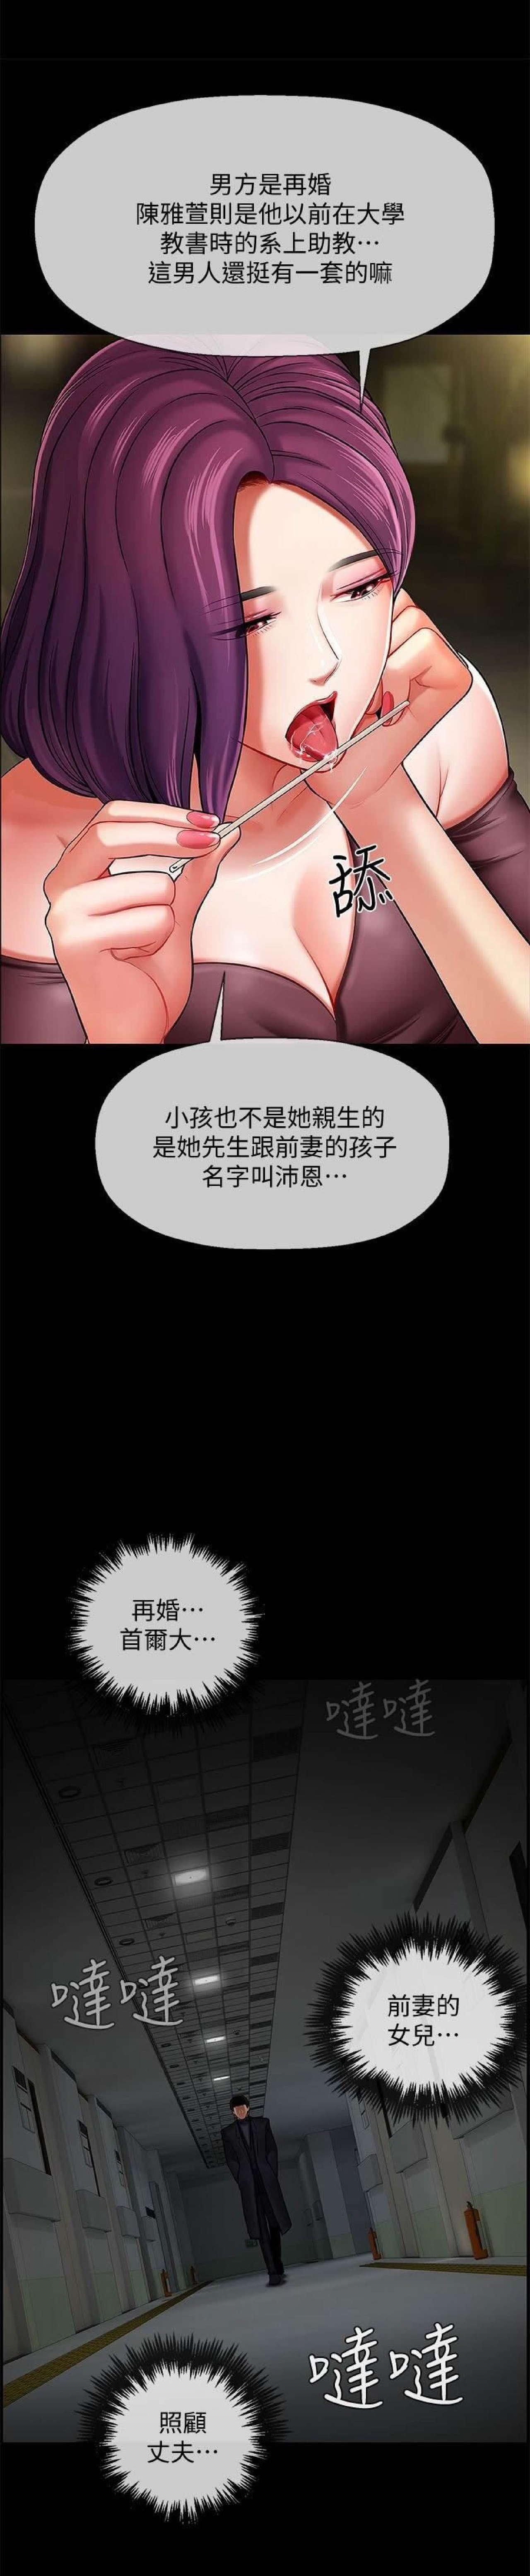 Dominant 坏老师 | PHYSICAL CLASSROOM 3 Club - Page 2